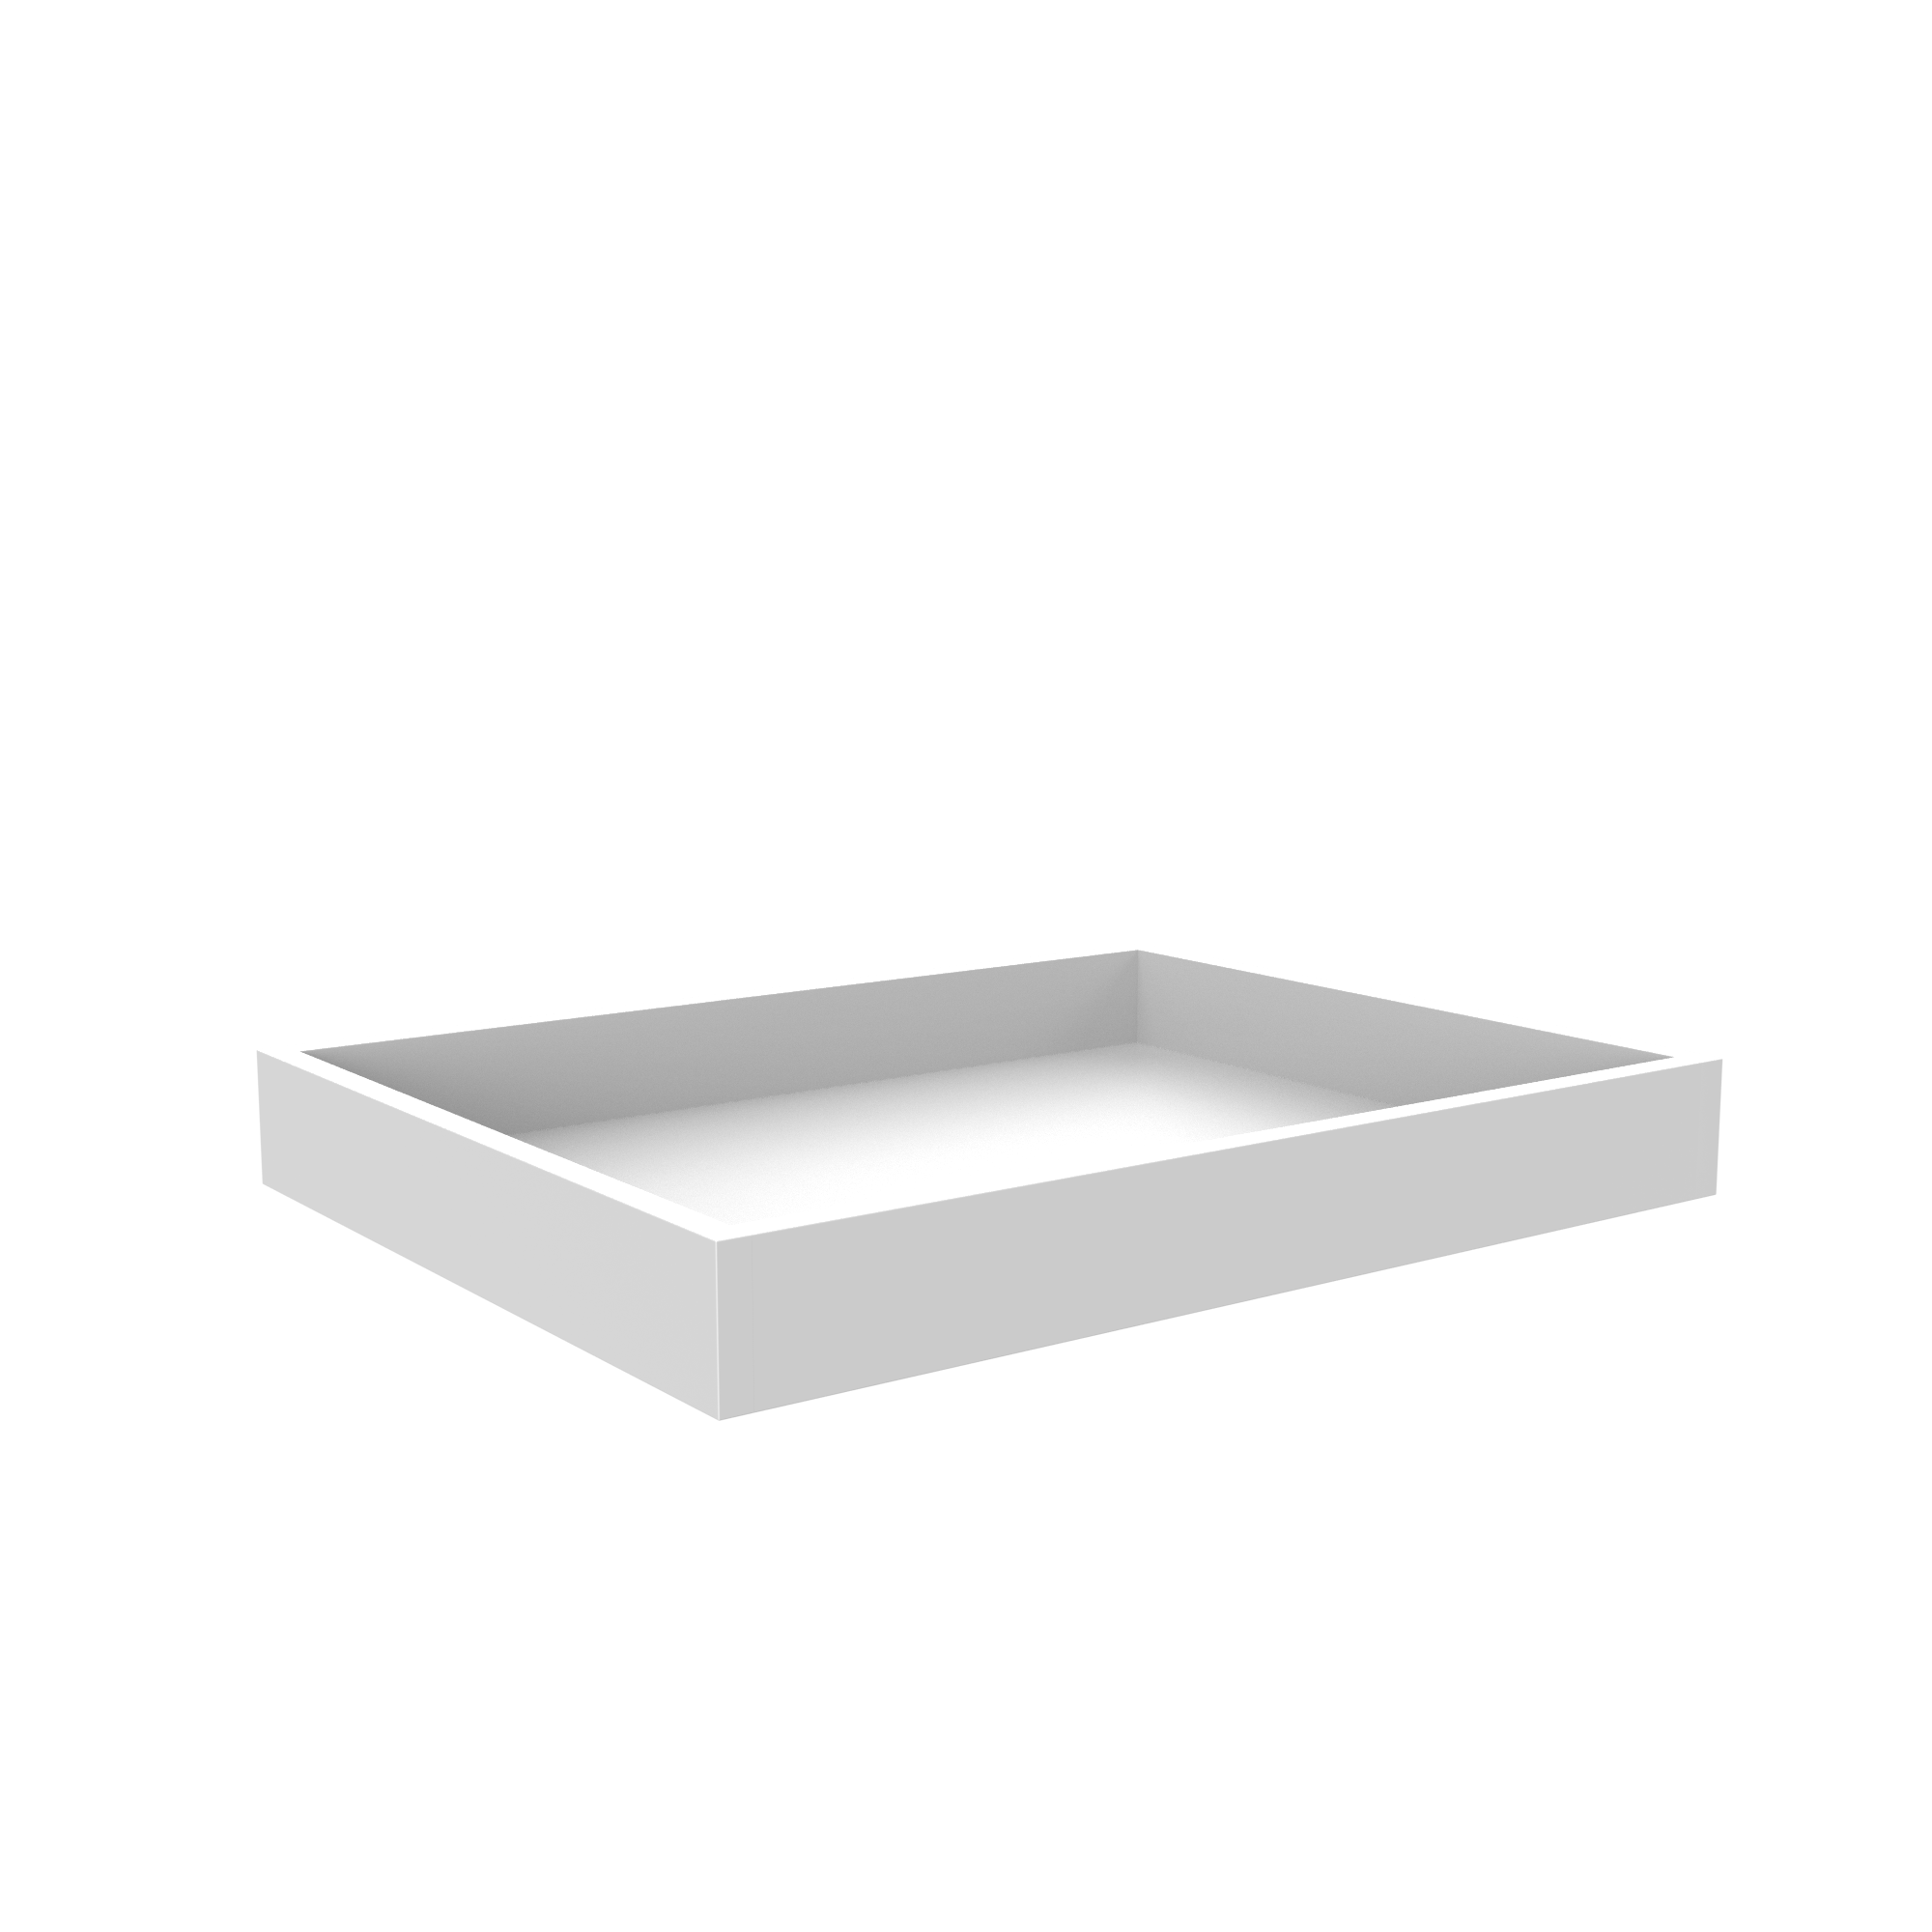 Roll Out Tray for Cabinets - Fits B27 - Aria White Shaker Cabinet - RTA